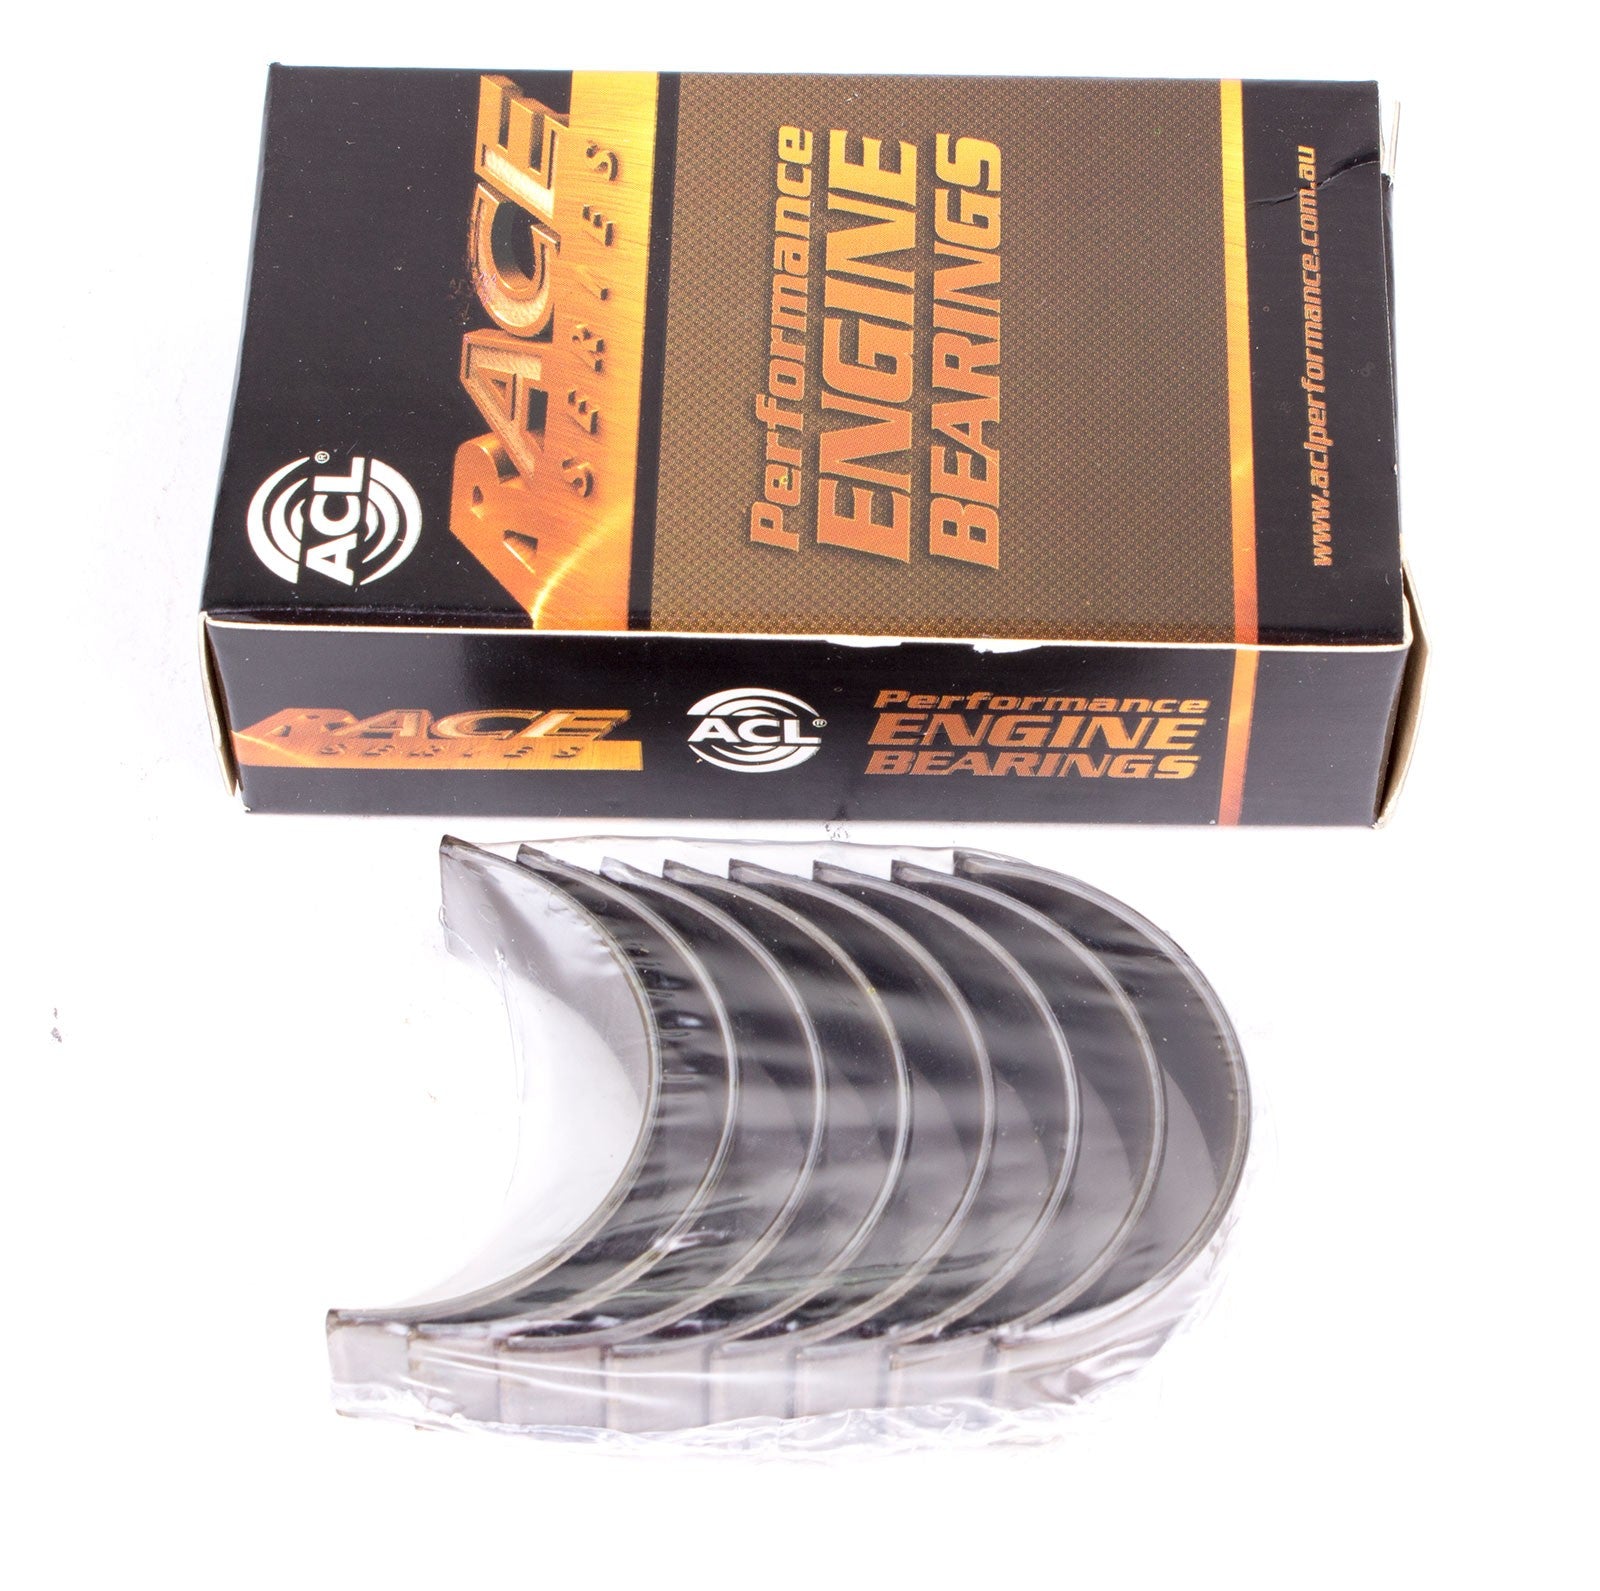 ACL 4SM2222H-020 Main bearing set (ACL Race Series) Photo-0 